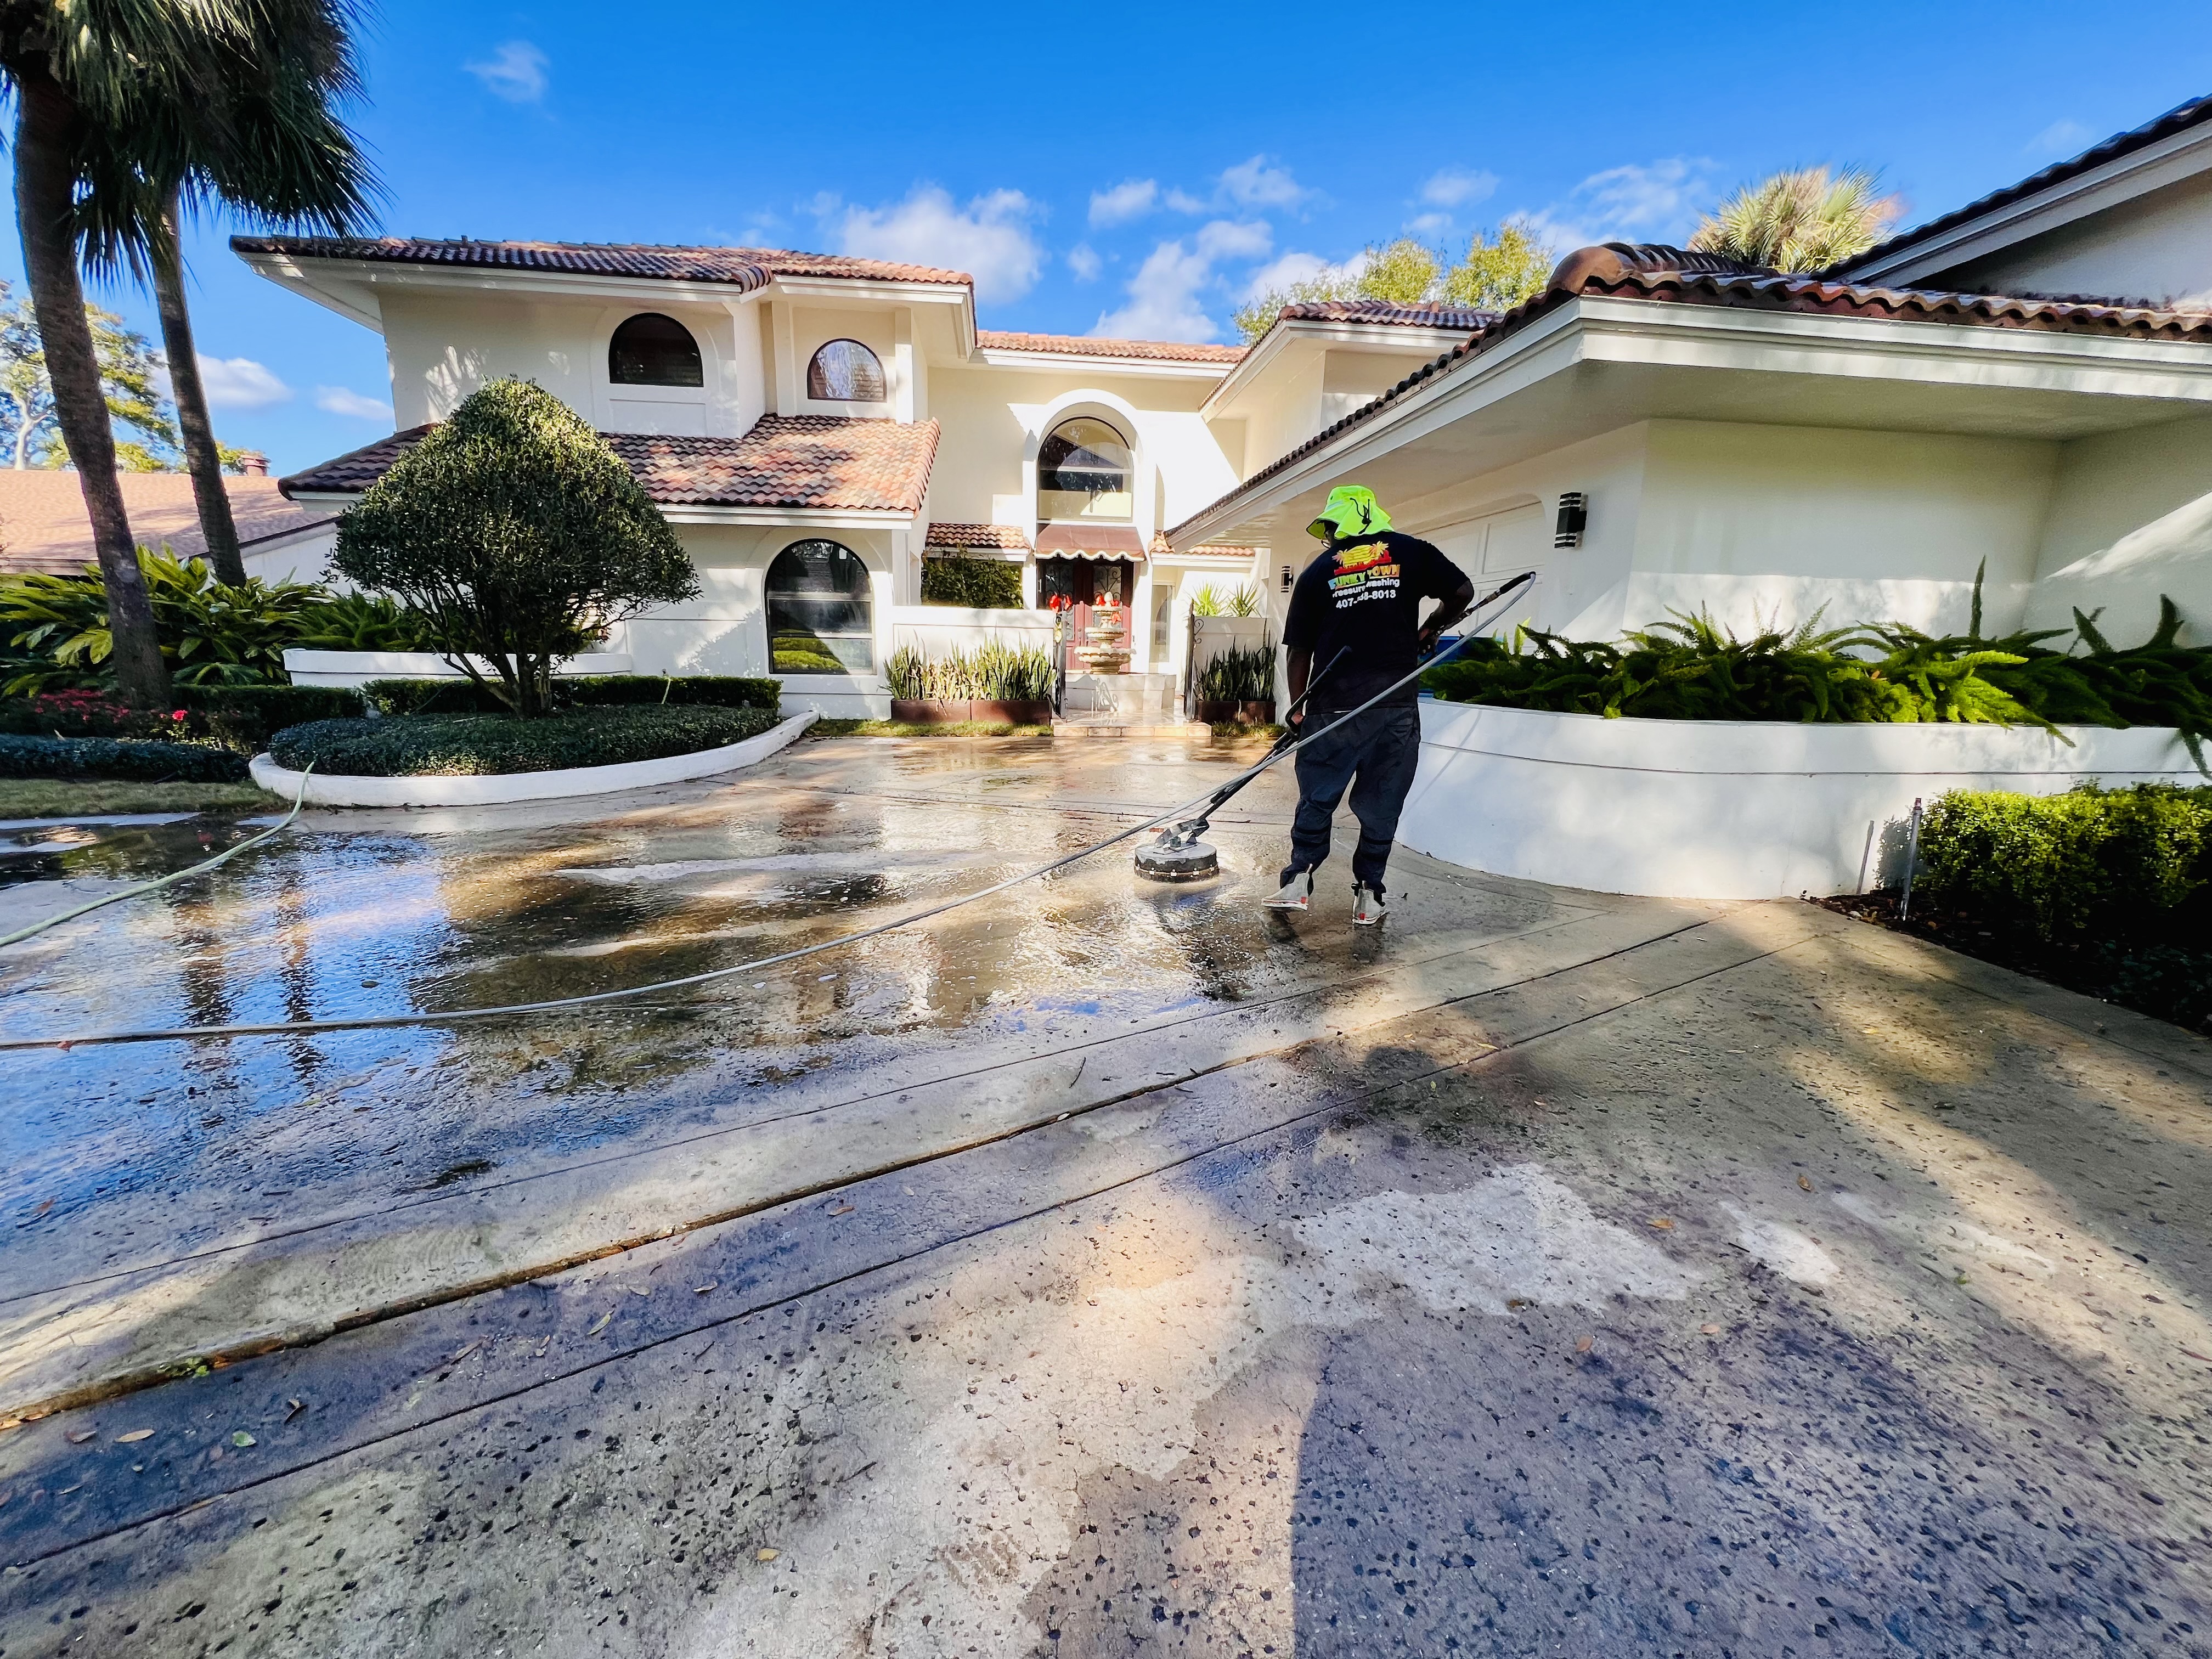 Another satisfied customer ! House Wash and Driveway Cleaning!